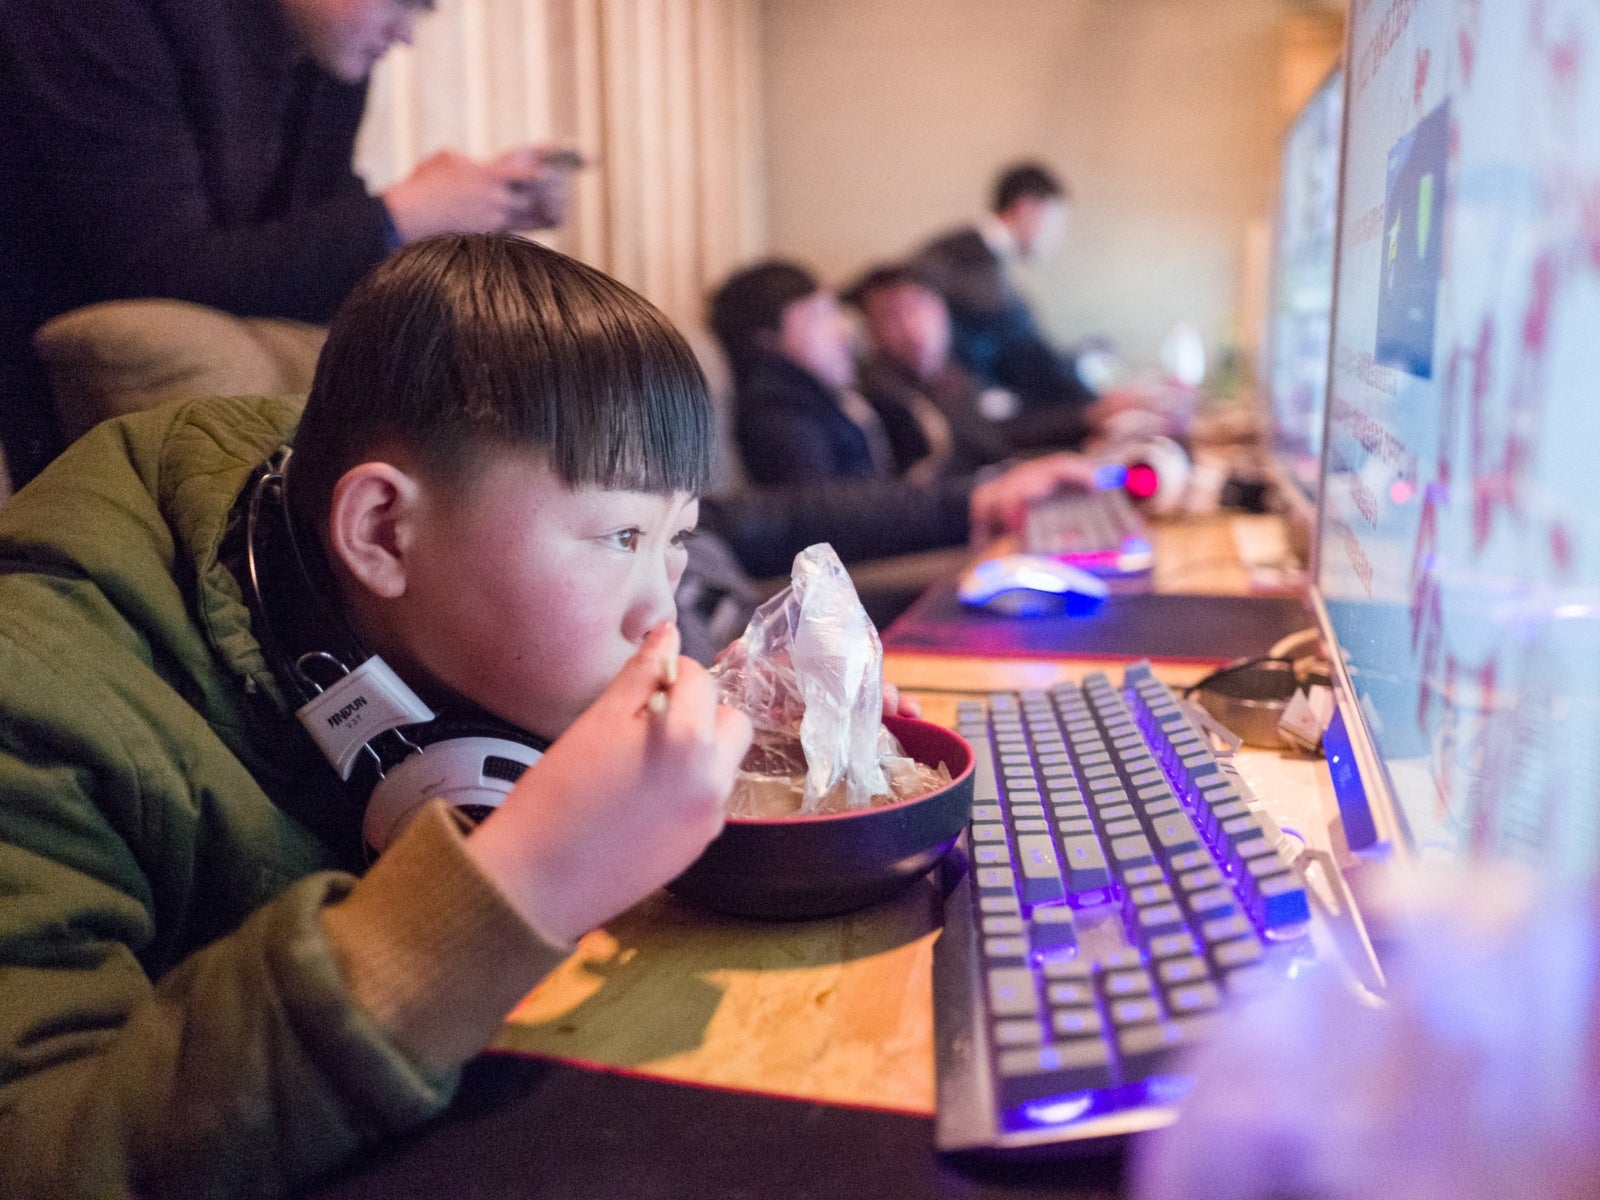 China Govt Bans Kids Under 18 From Playing Video Games for More Than 90 Mins & After 10pm - WORLD OF BUZZ